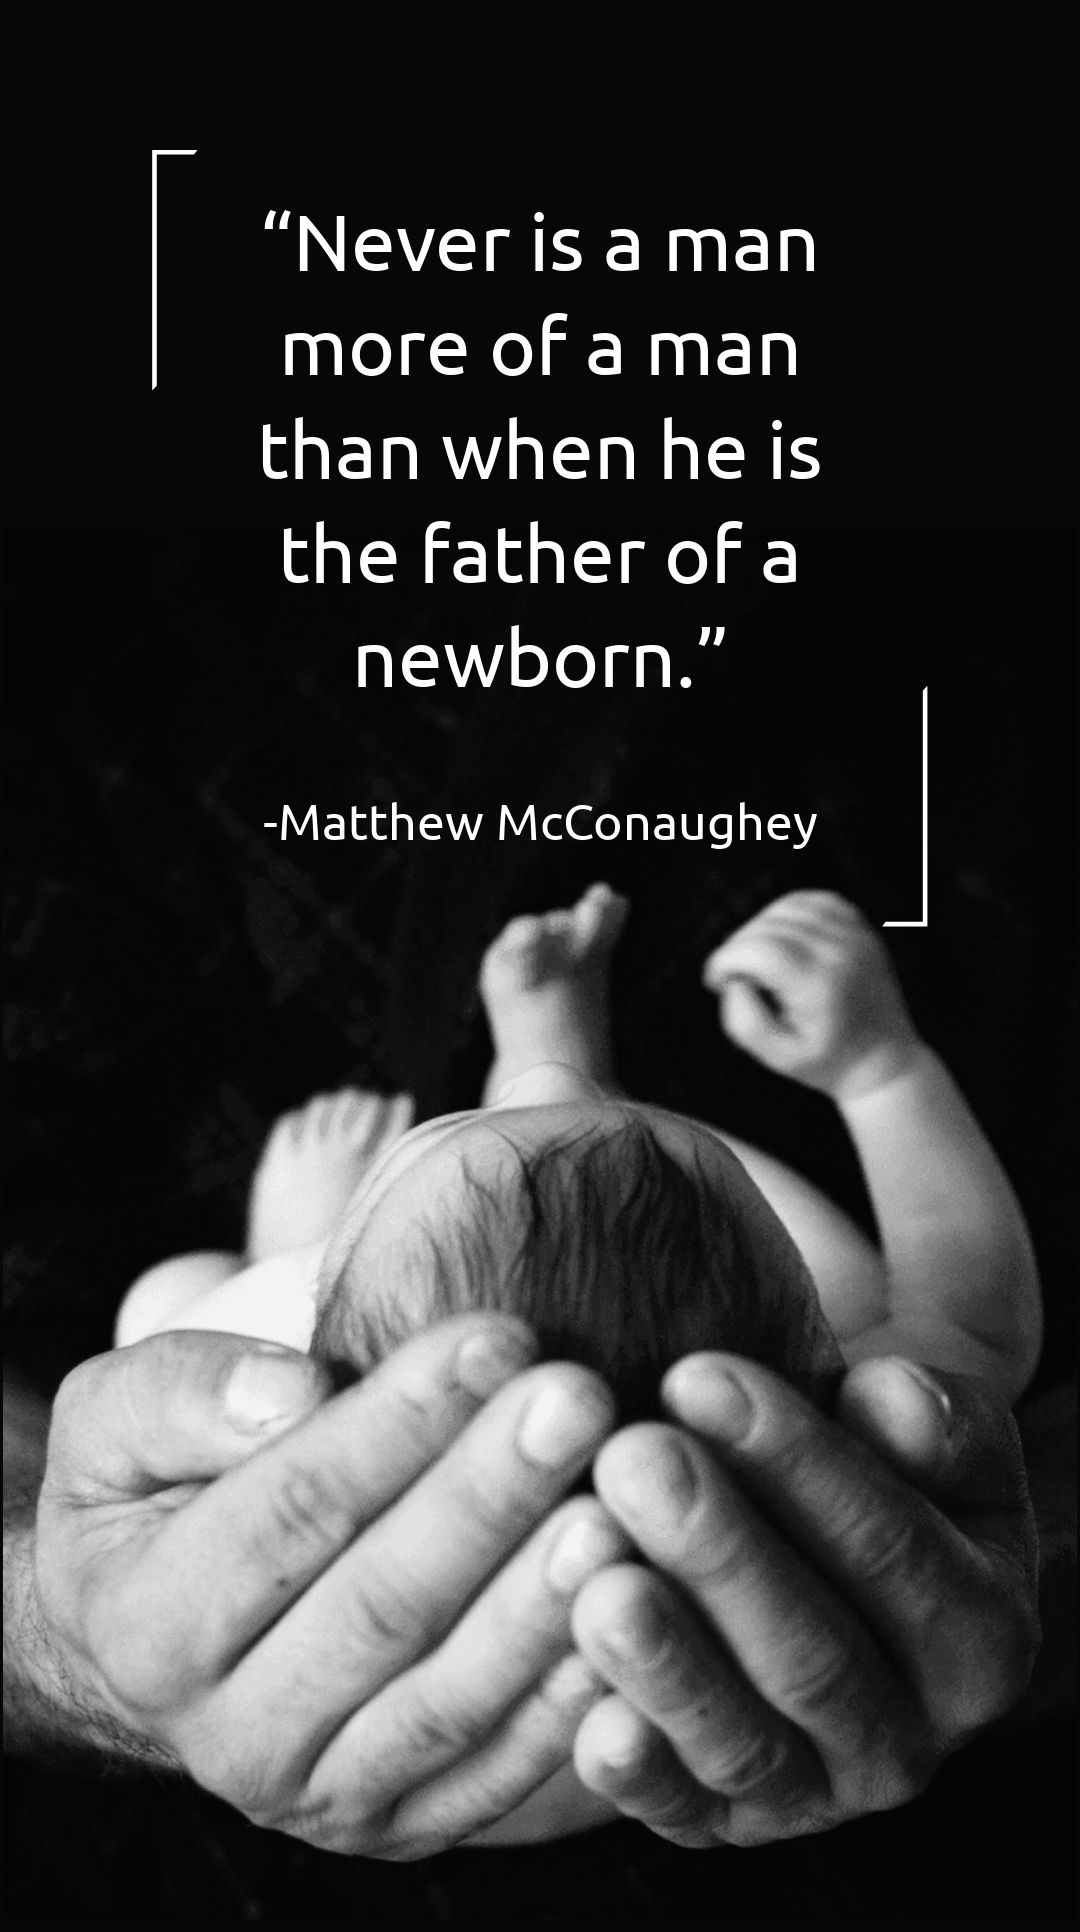 Matthew McConaughey - Never is a man more of a man than when he is the father of a newborn. in JPG